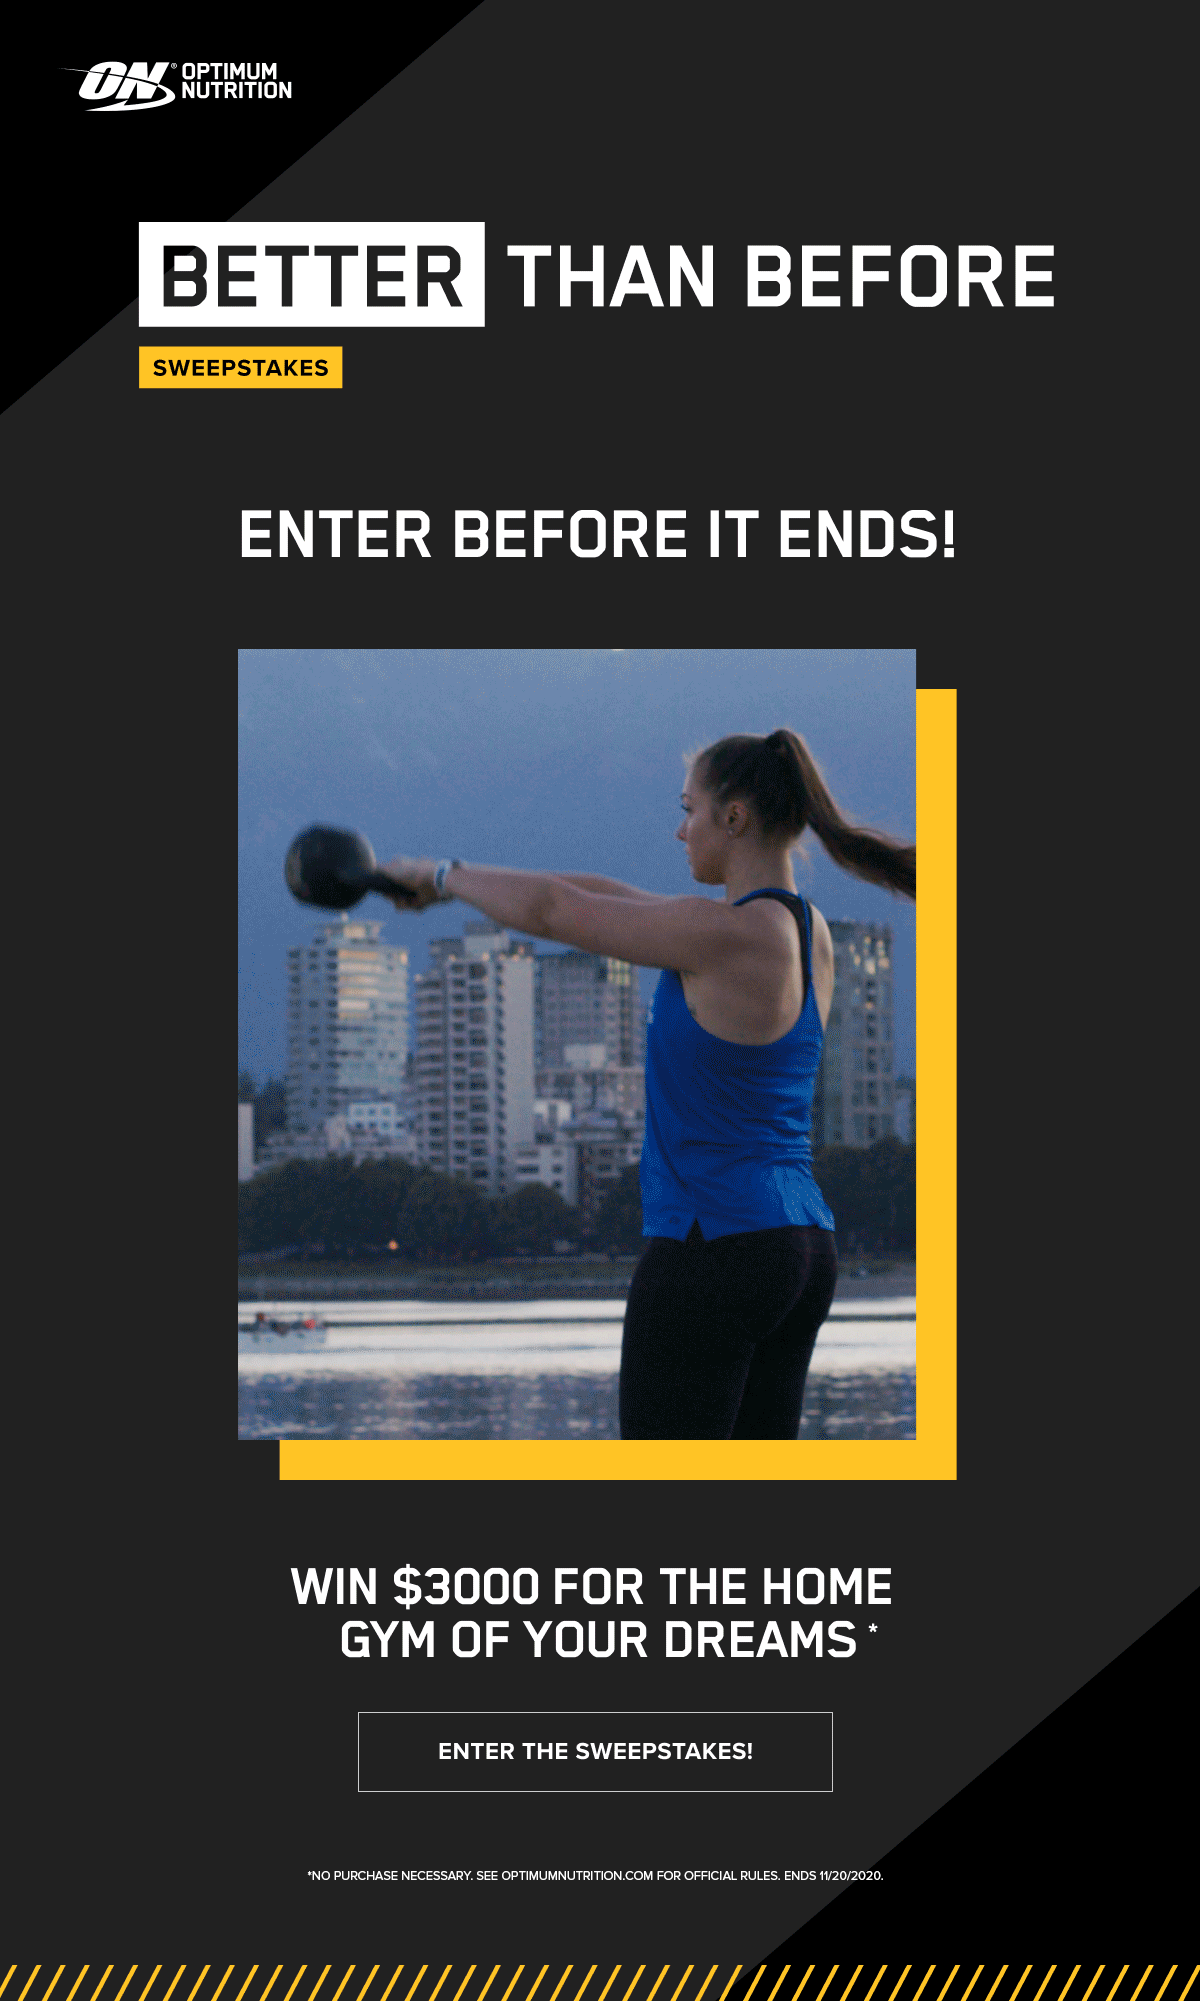 Enter before it ends! Win $3000 for the home gym of your dreams! *No purchase necessary. See optimumnutrition.com for official rules.